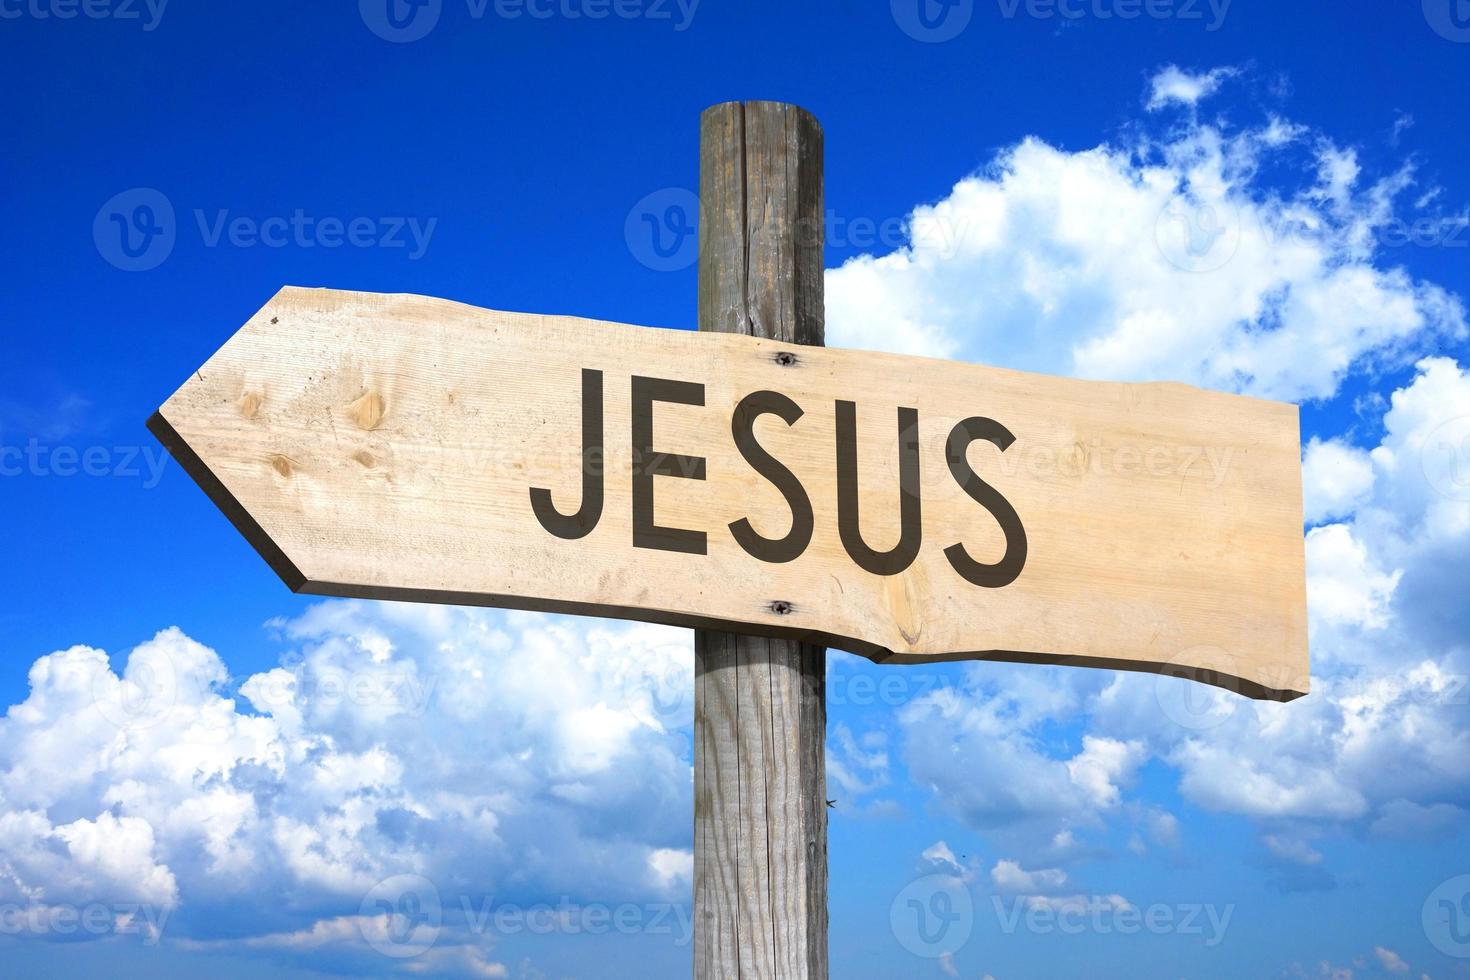 Jesus - Wooden Signpost with one Arrow, Sky with Clouds in Background photo